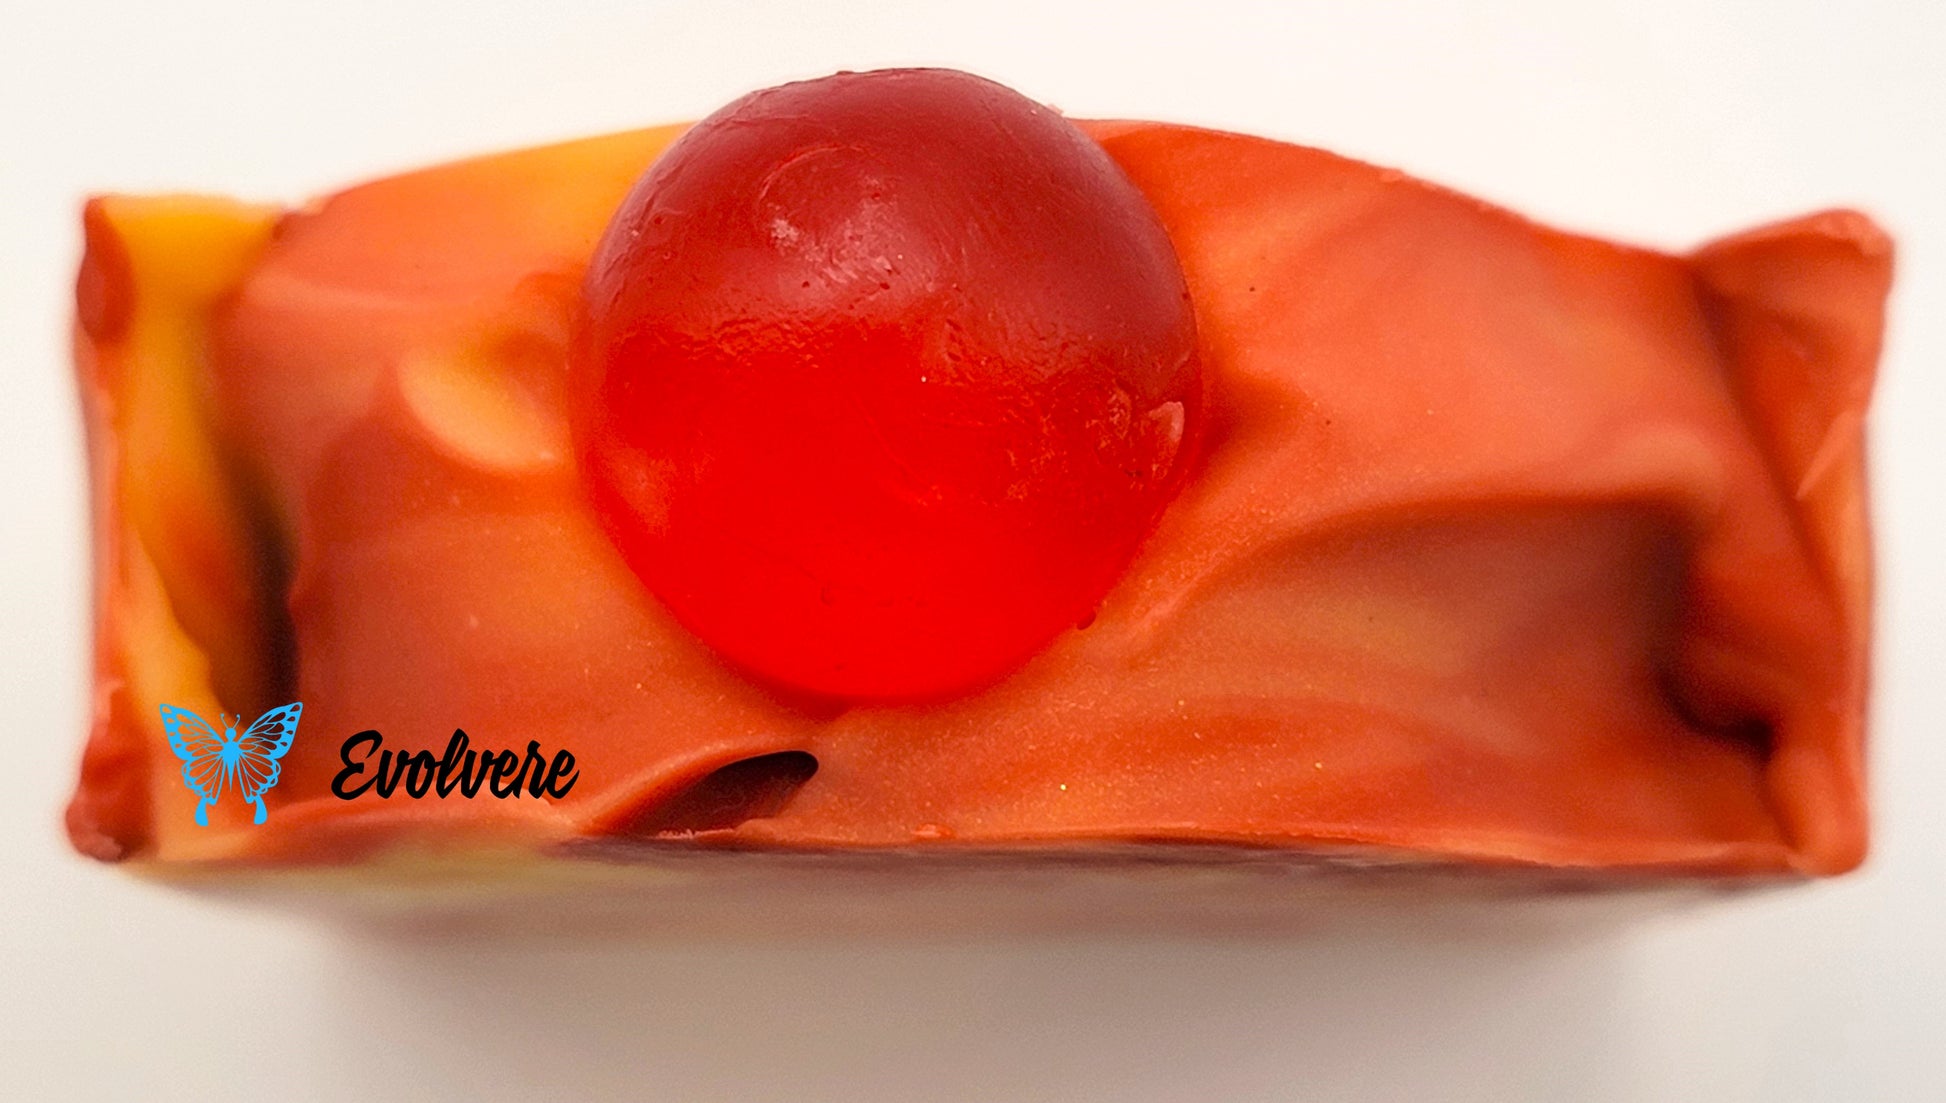 Soap bar top red, yellow and orange in color with a red soap ball in center